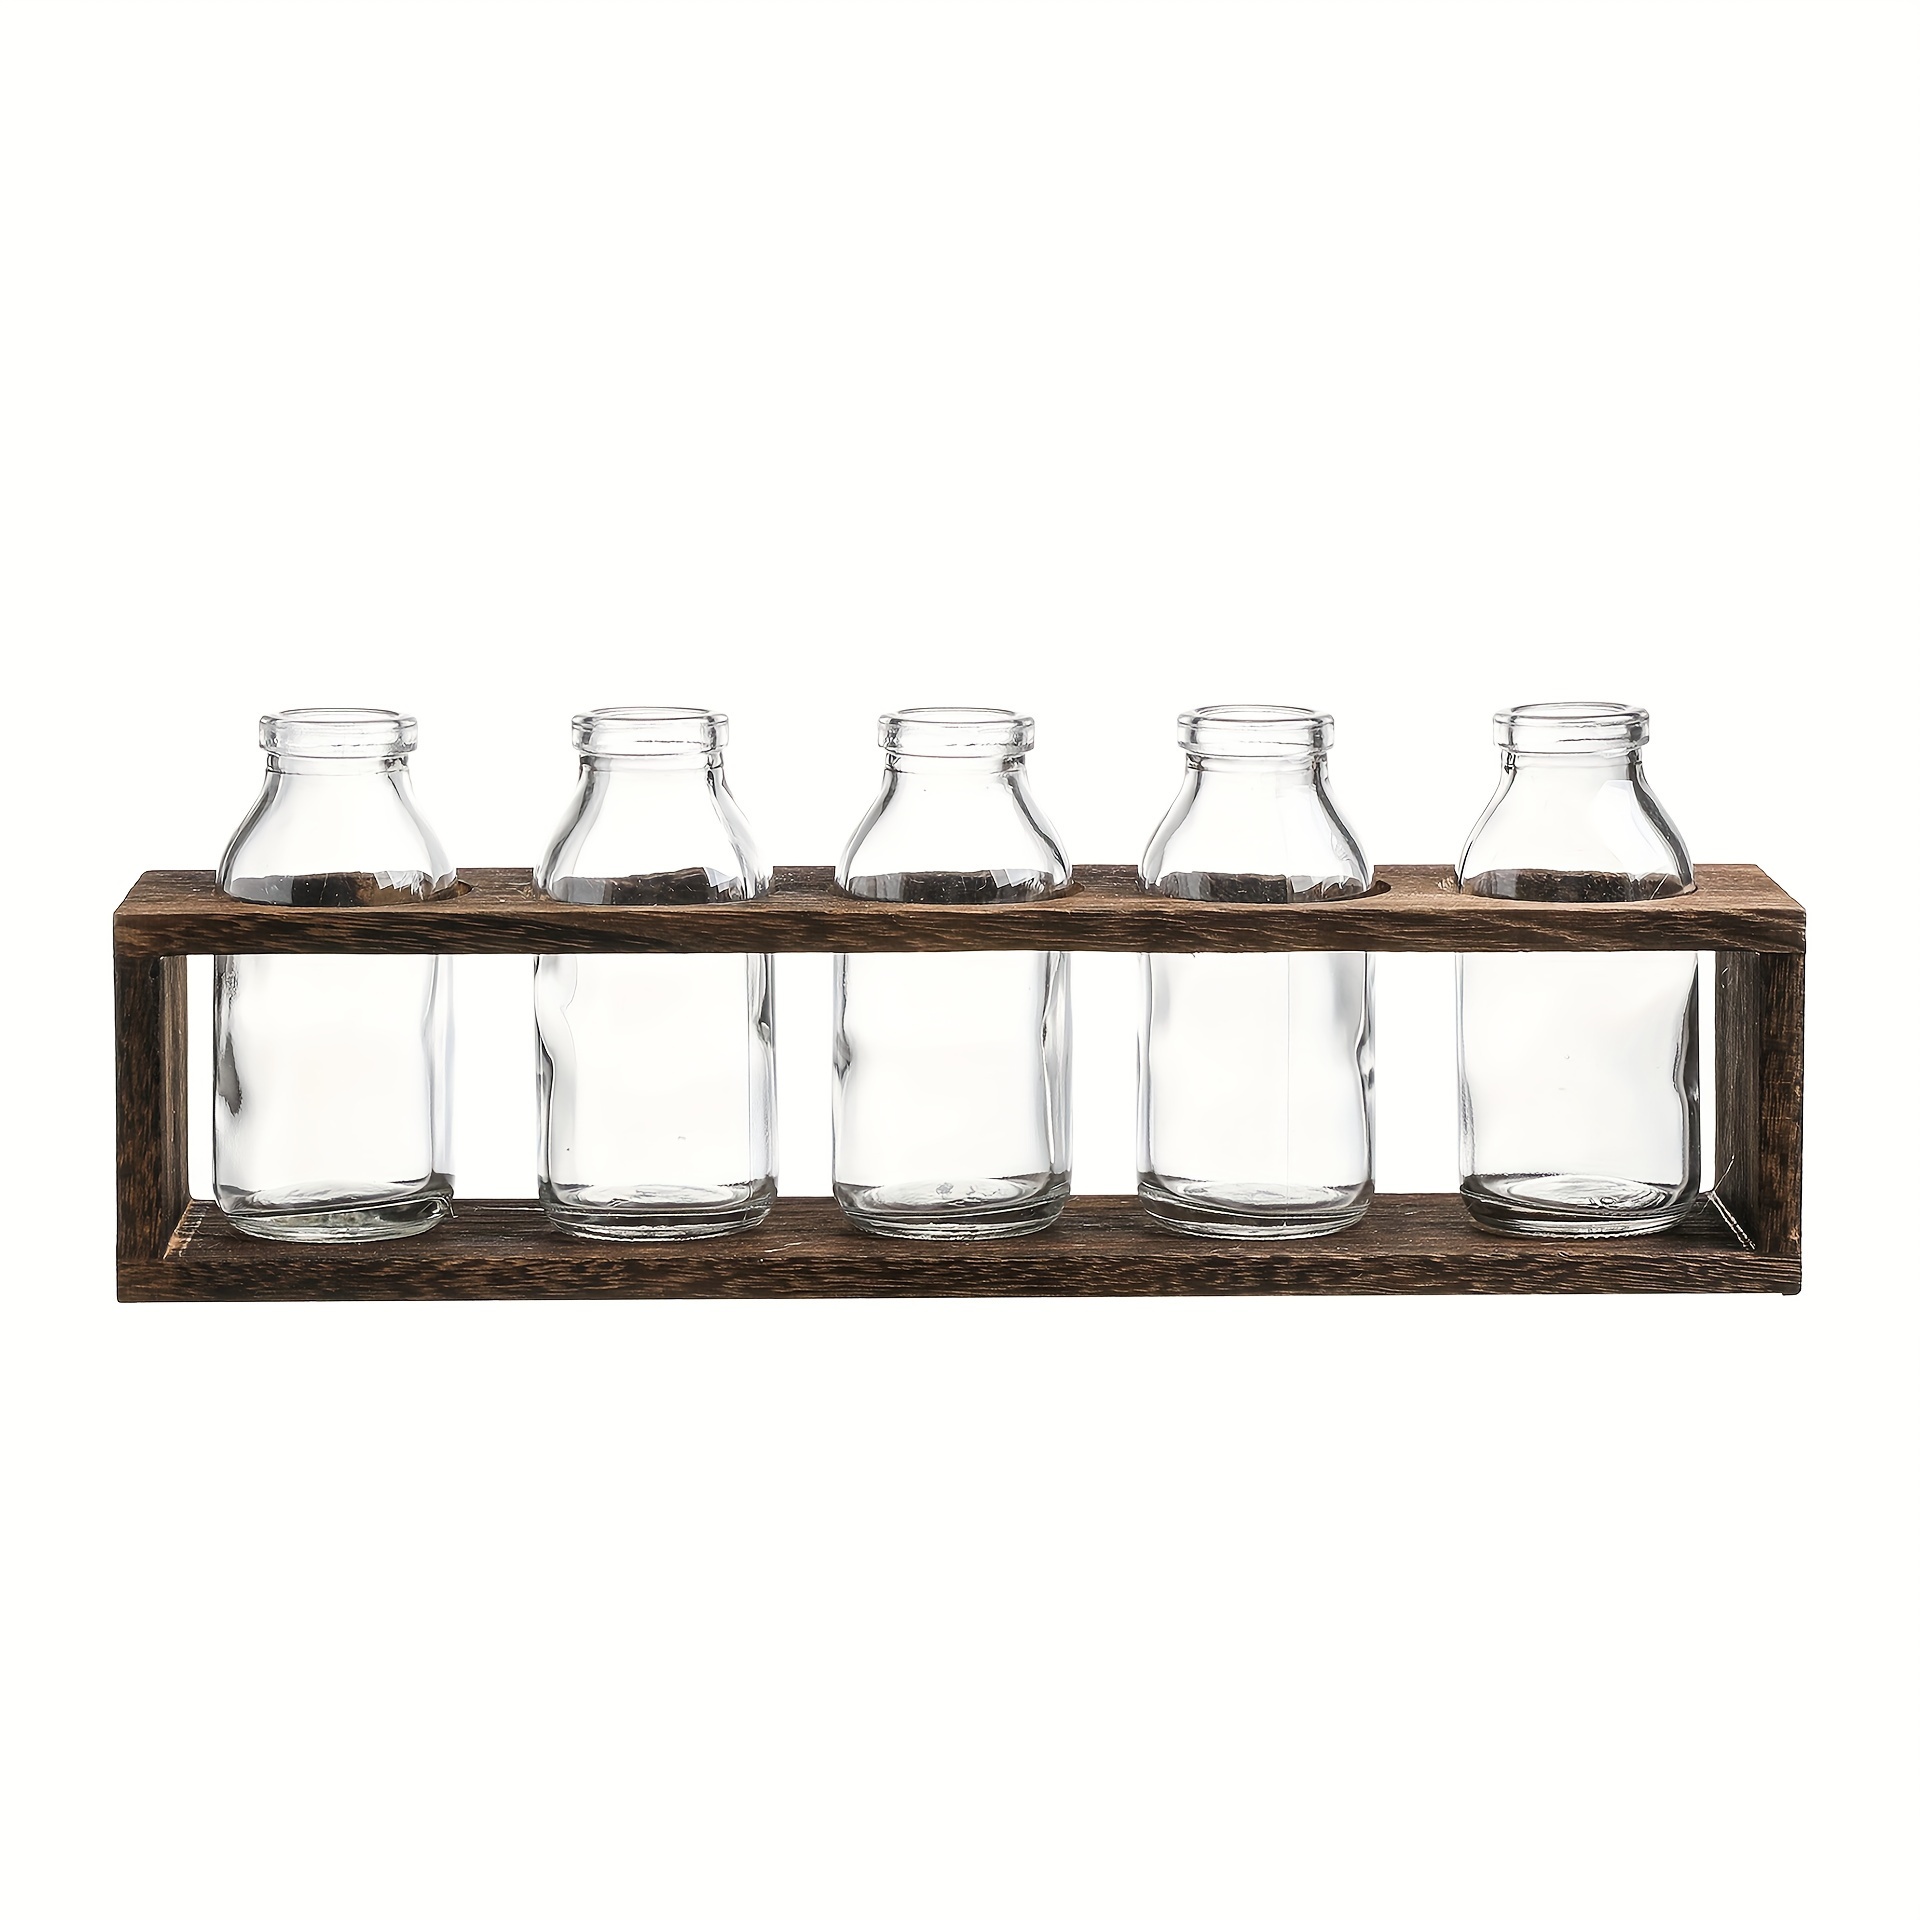 

1pc, Rustic Glass Bud Bottles Vase Set With Wooden Crate Stand (13.1''x2.8''x4.5''/33.27cmx7.11cmx11.43cm), Country Style Home Decor, Vintage Tabletop Display, Farmhouse Accent Decor